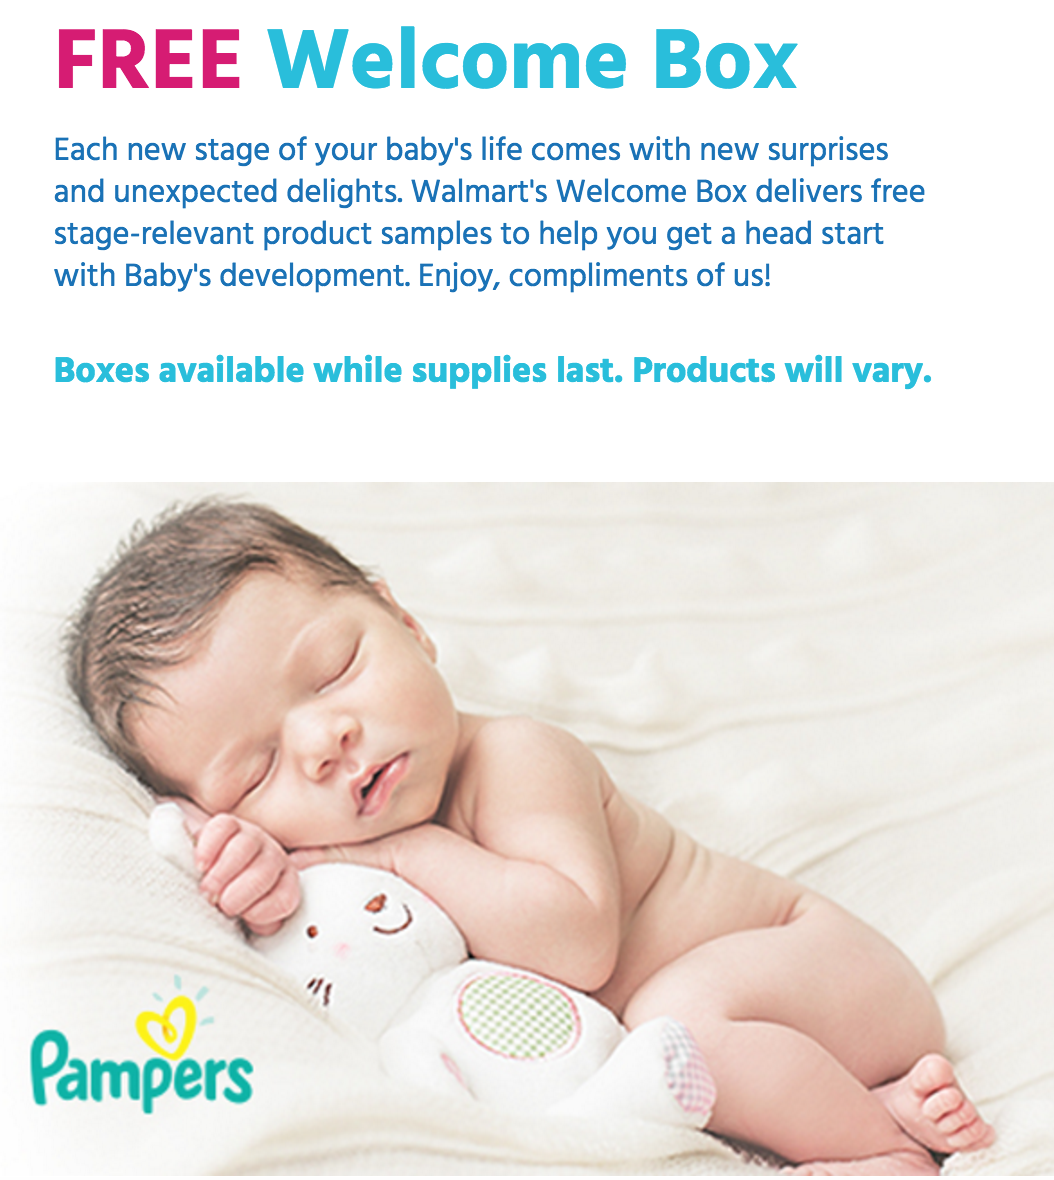 free-box-of-baby-product-samples-from-walmart